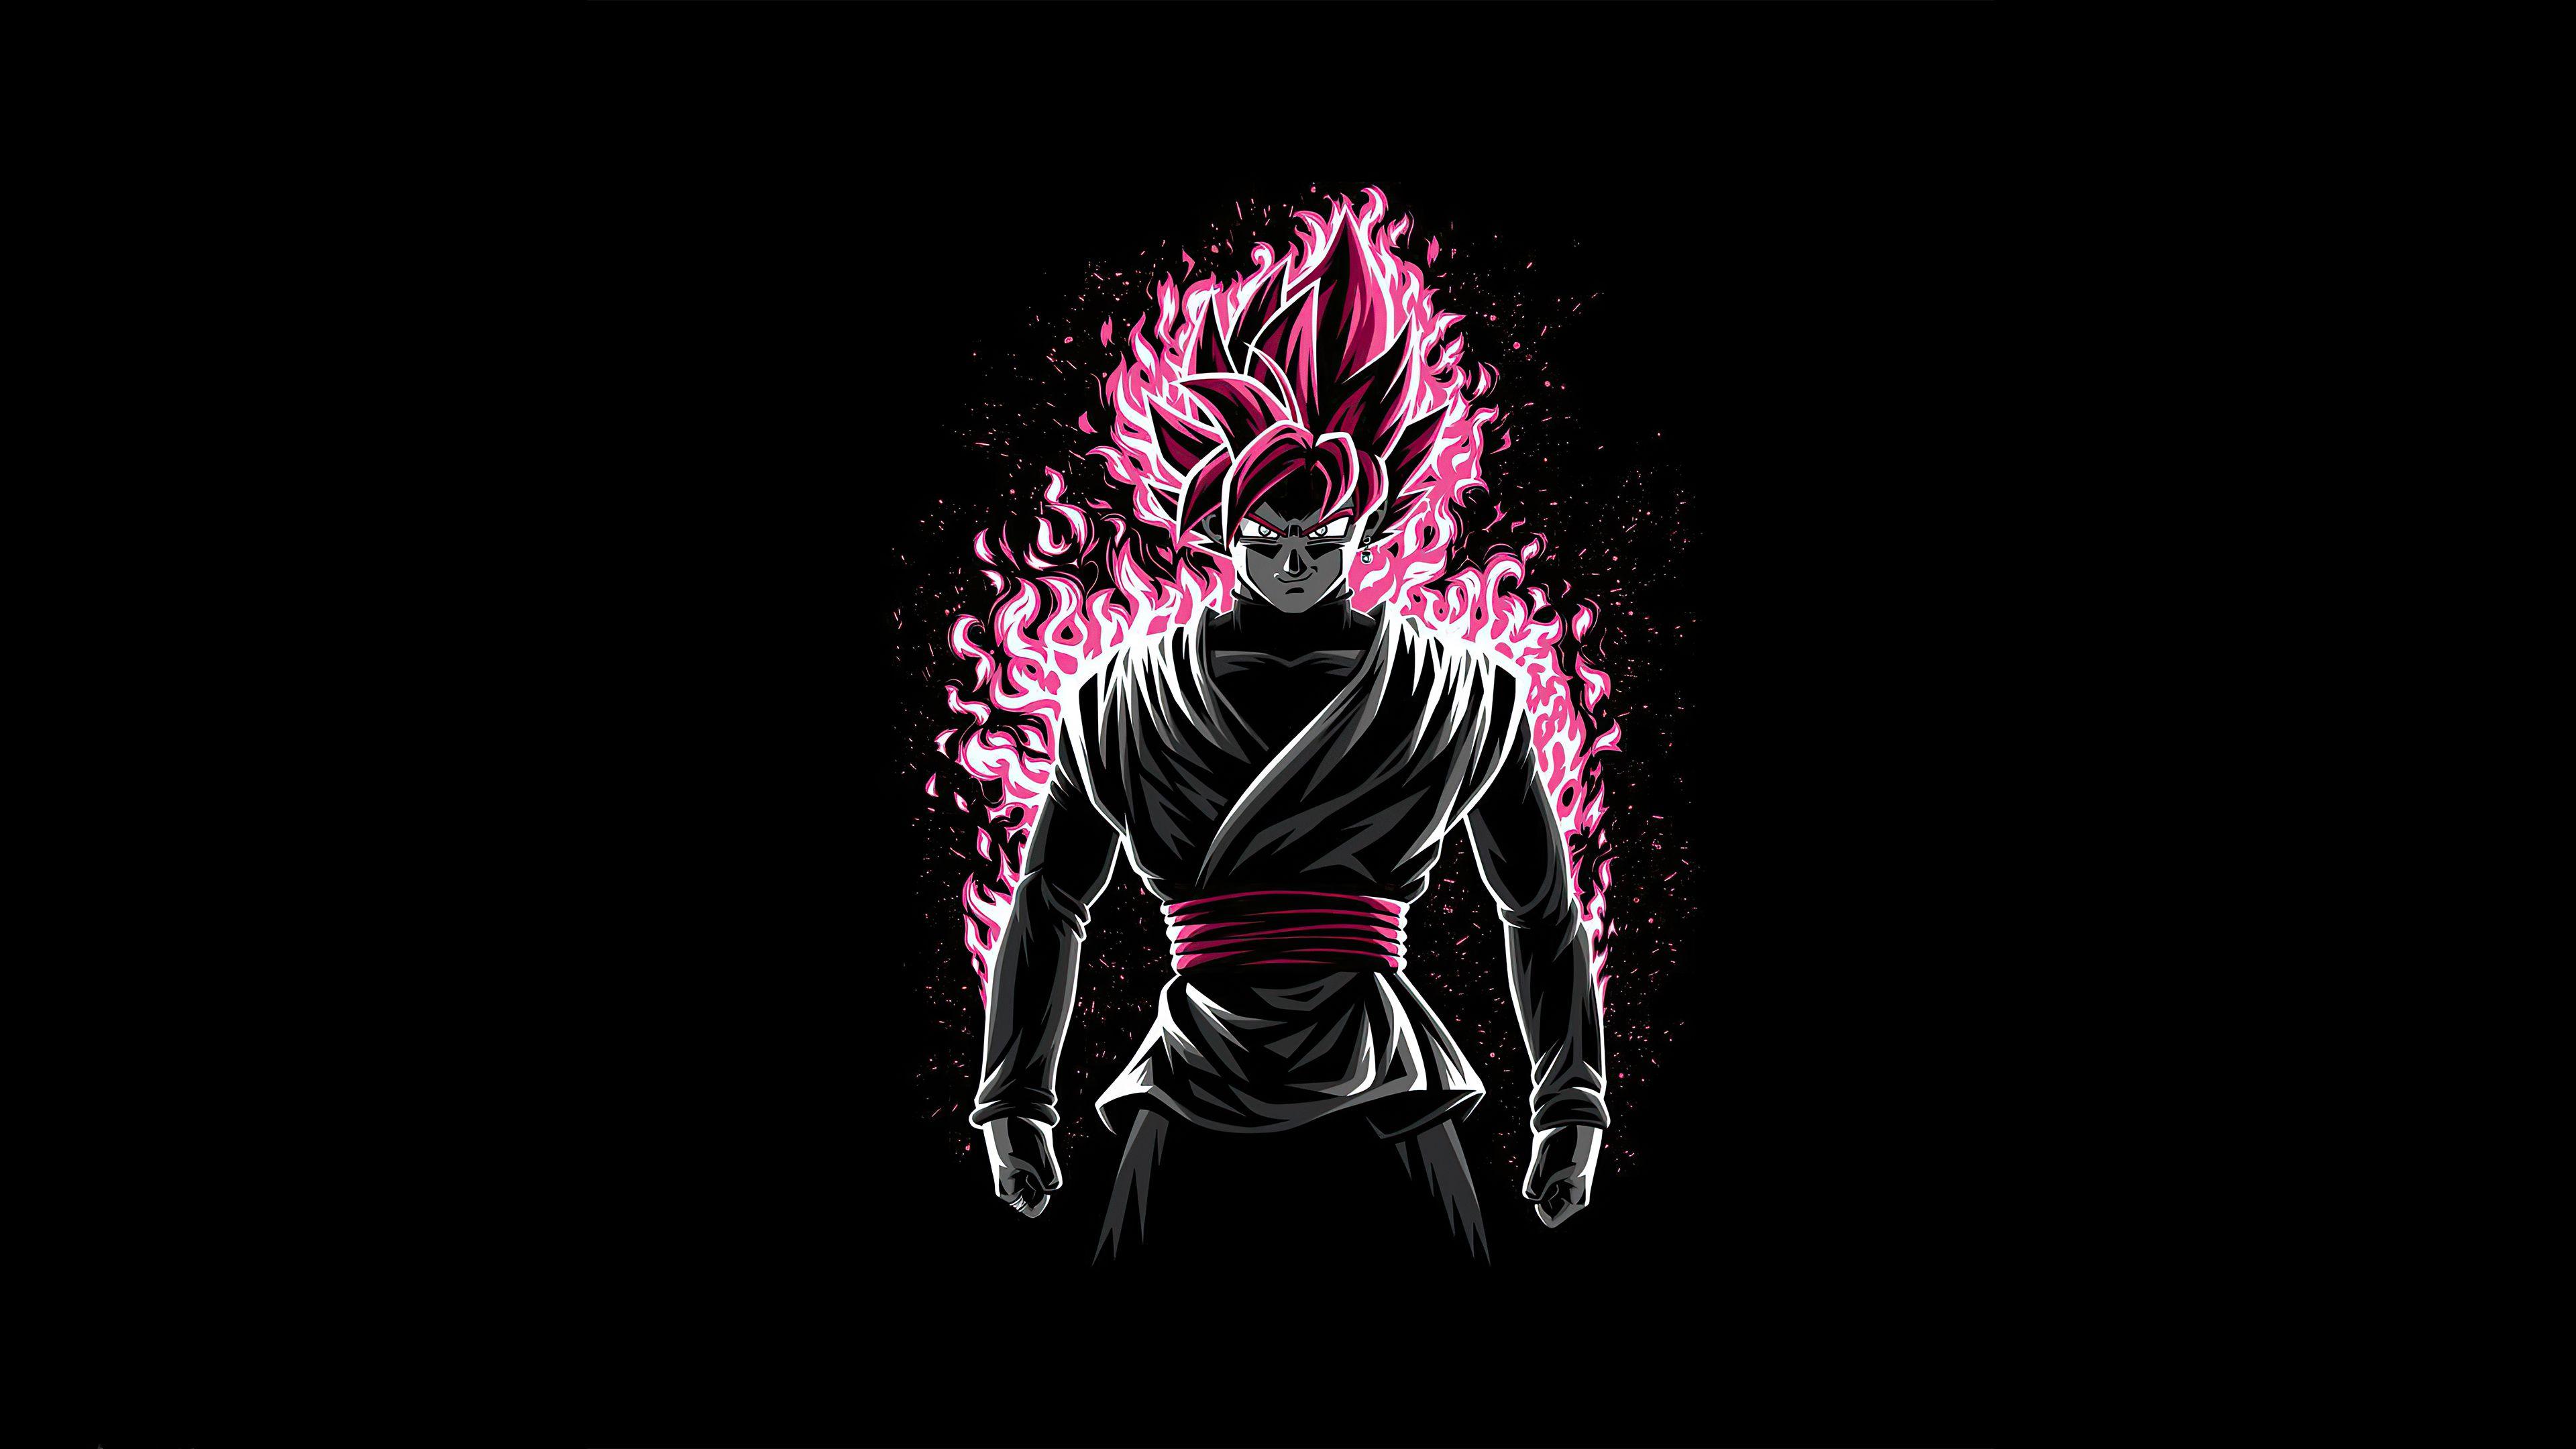 3840x2160 Battle Fire Black Rose Dragon Ball Z 4k Chromebook Pixel HD 4k Wallpaper, Image, Background, Photo and Picture